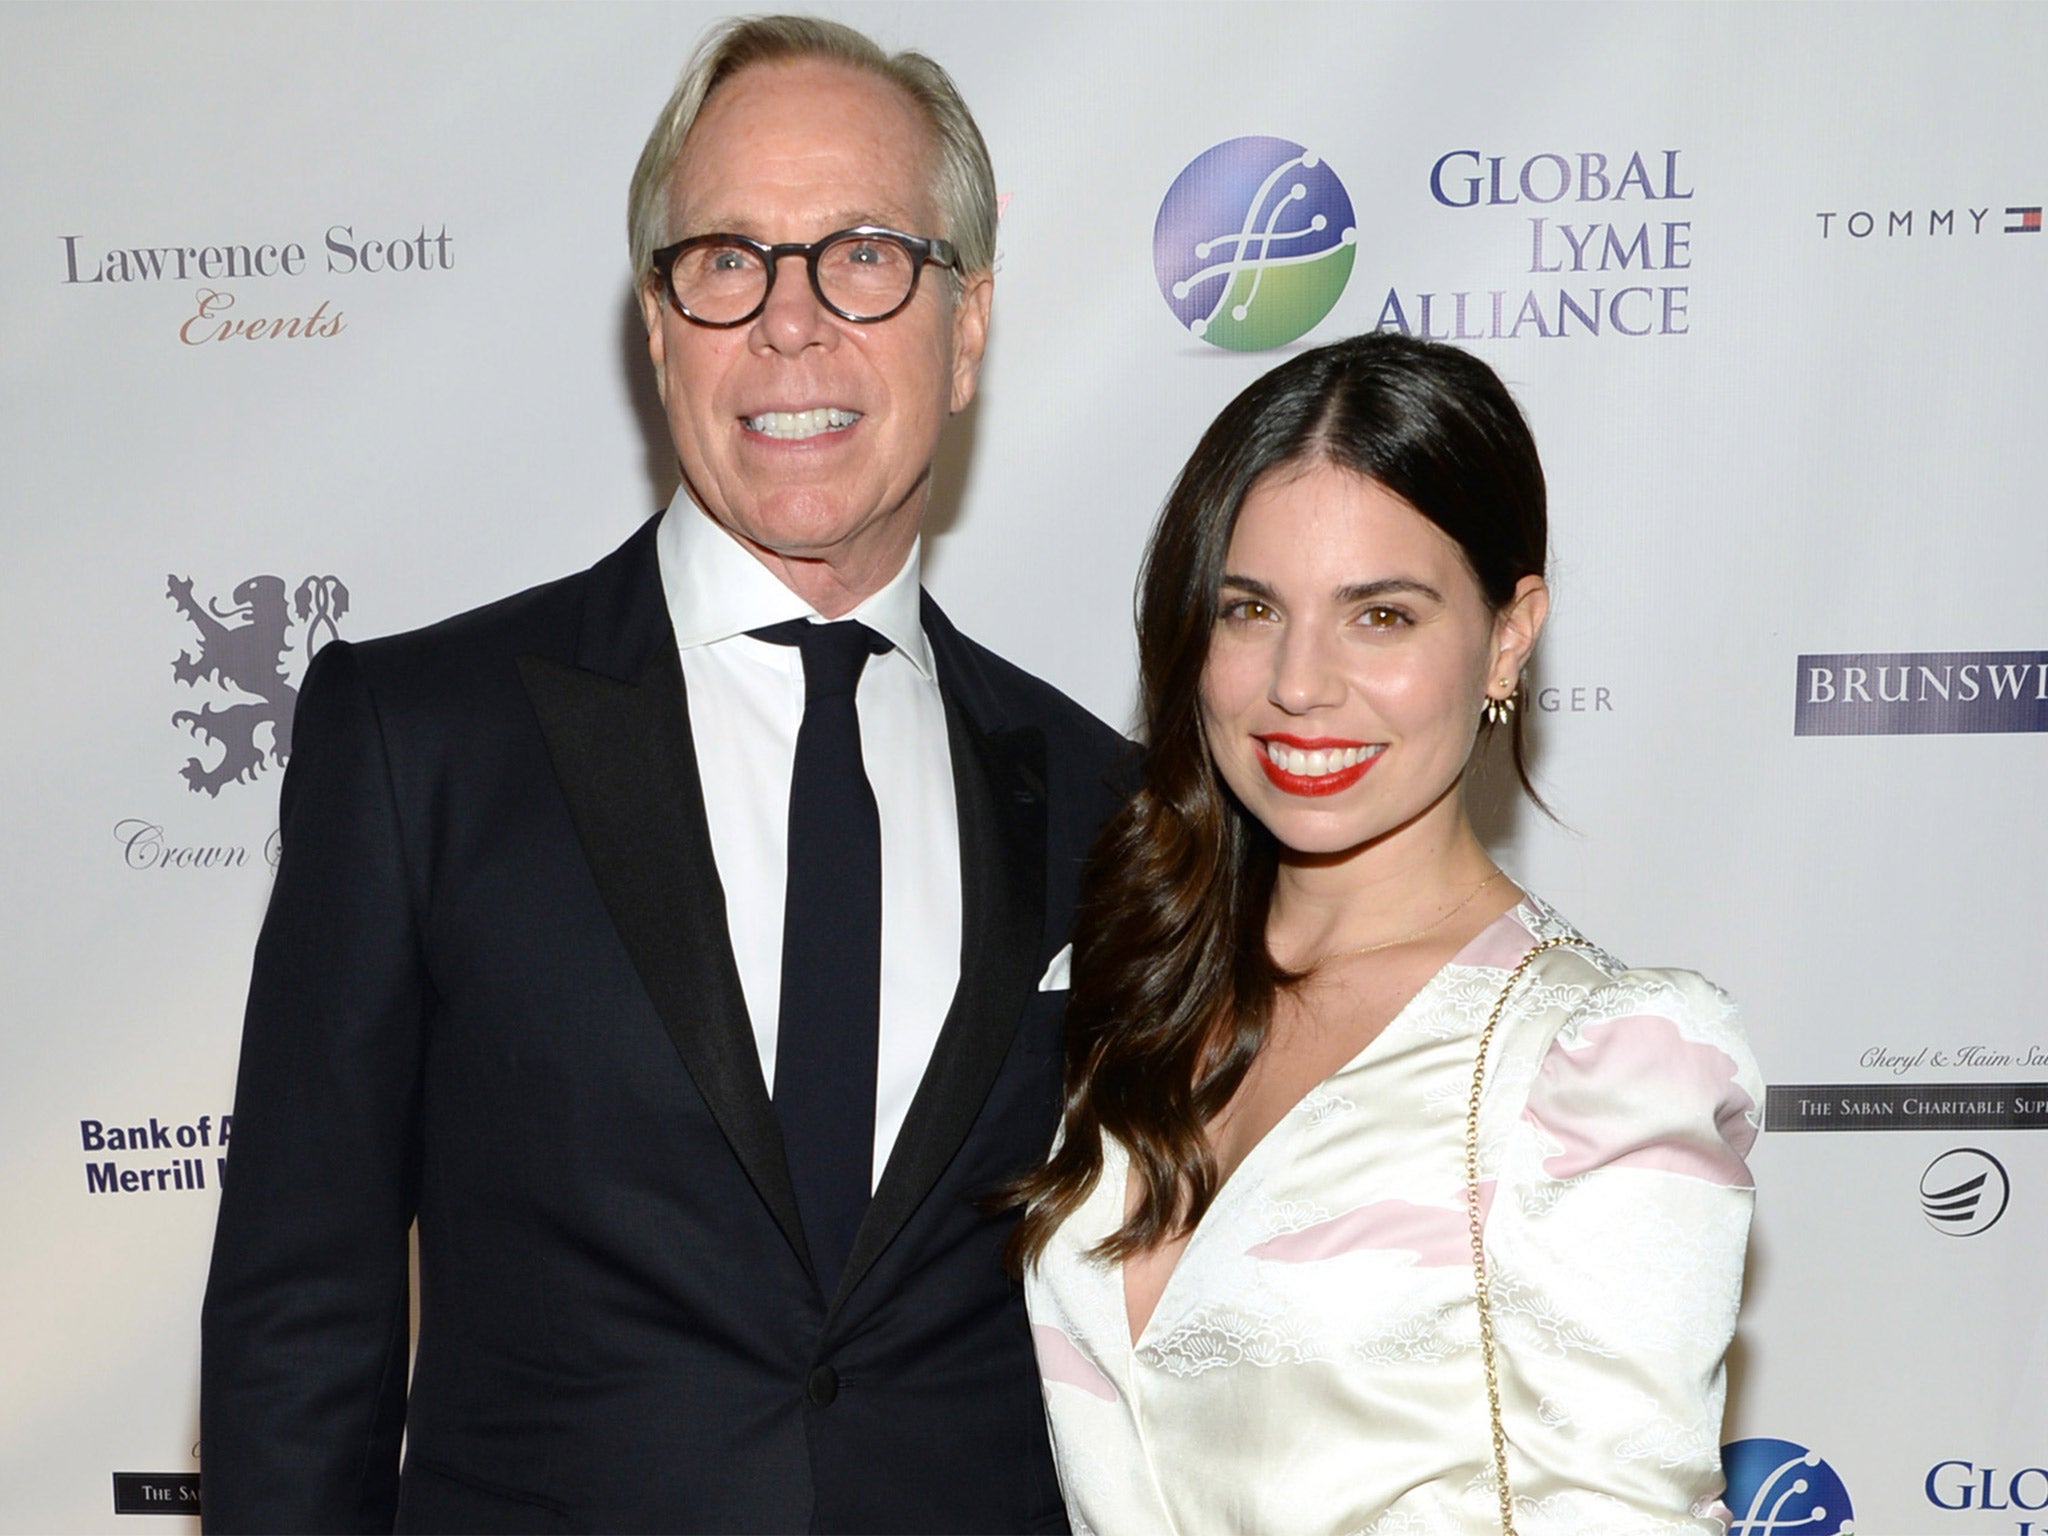 Tommy Hilfiger’s daughter left in ‘excruciating pain’ because of Lyme